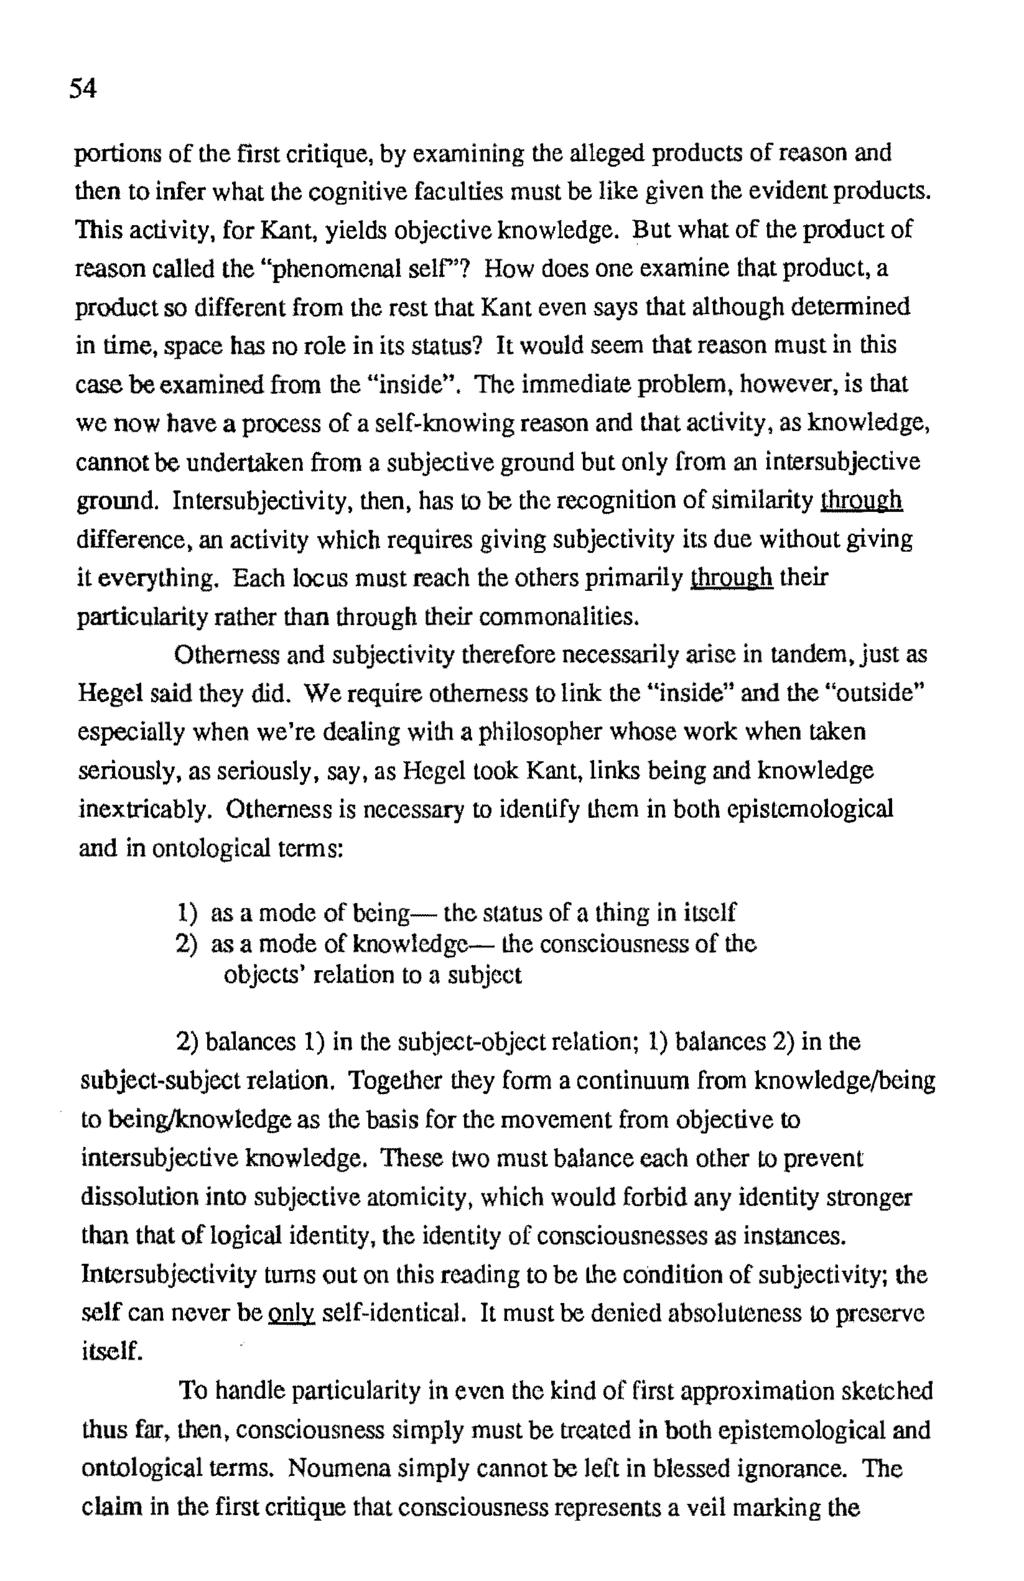 54 portions of the first critique, by examining the alleged products of reason and then to infer what the cognitive faculties must be like given the evident products.